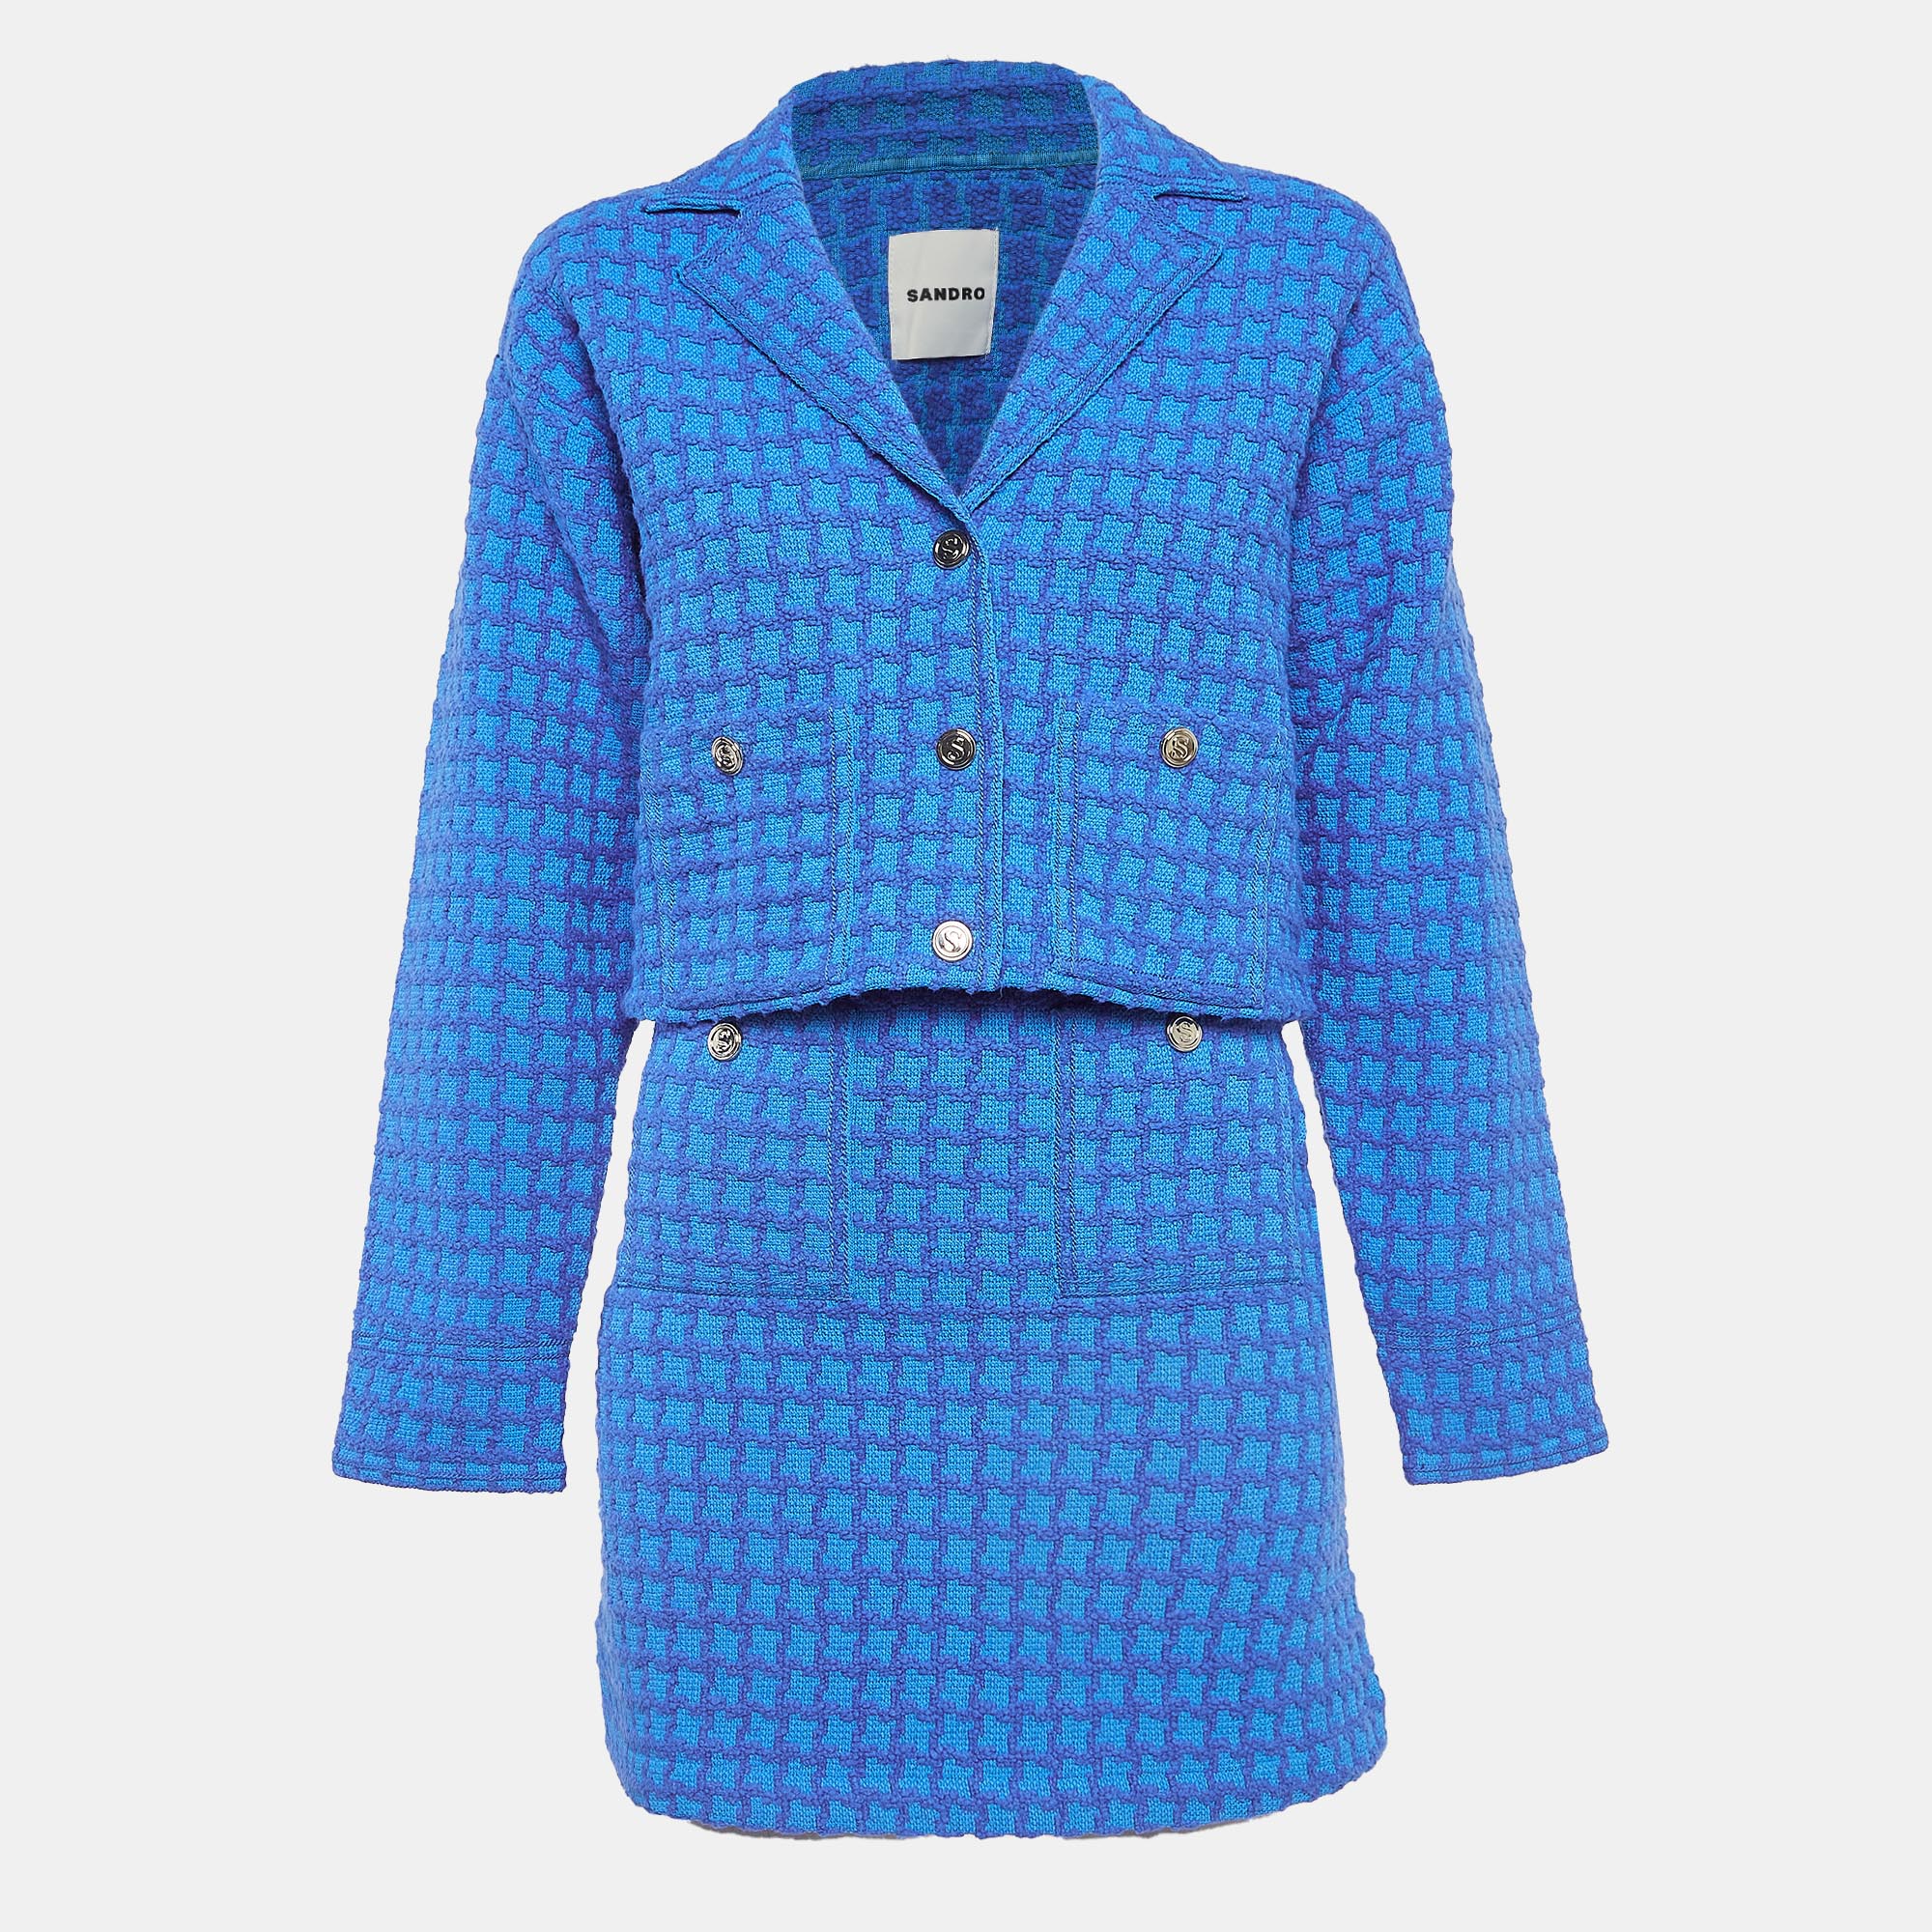 Pre-owned Sandro Blue Checked Tweed Blazer And Skirt Set M/s